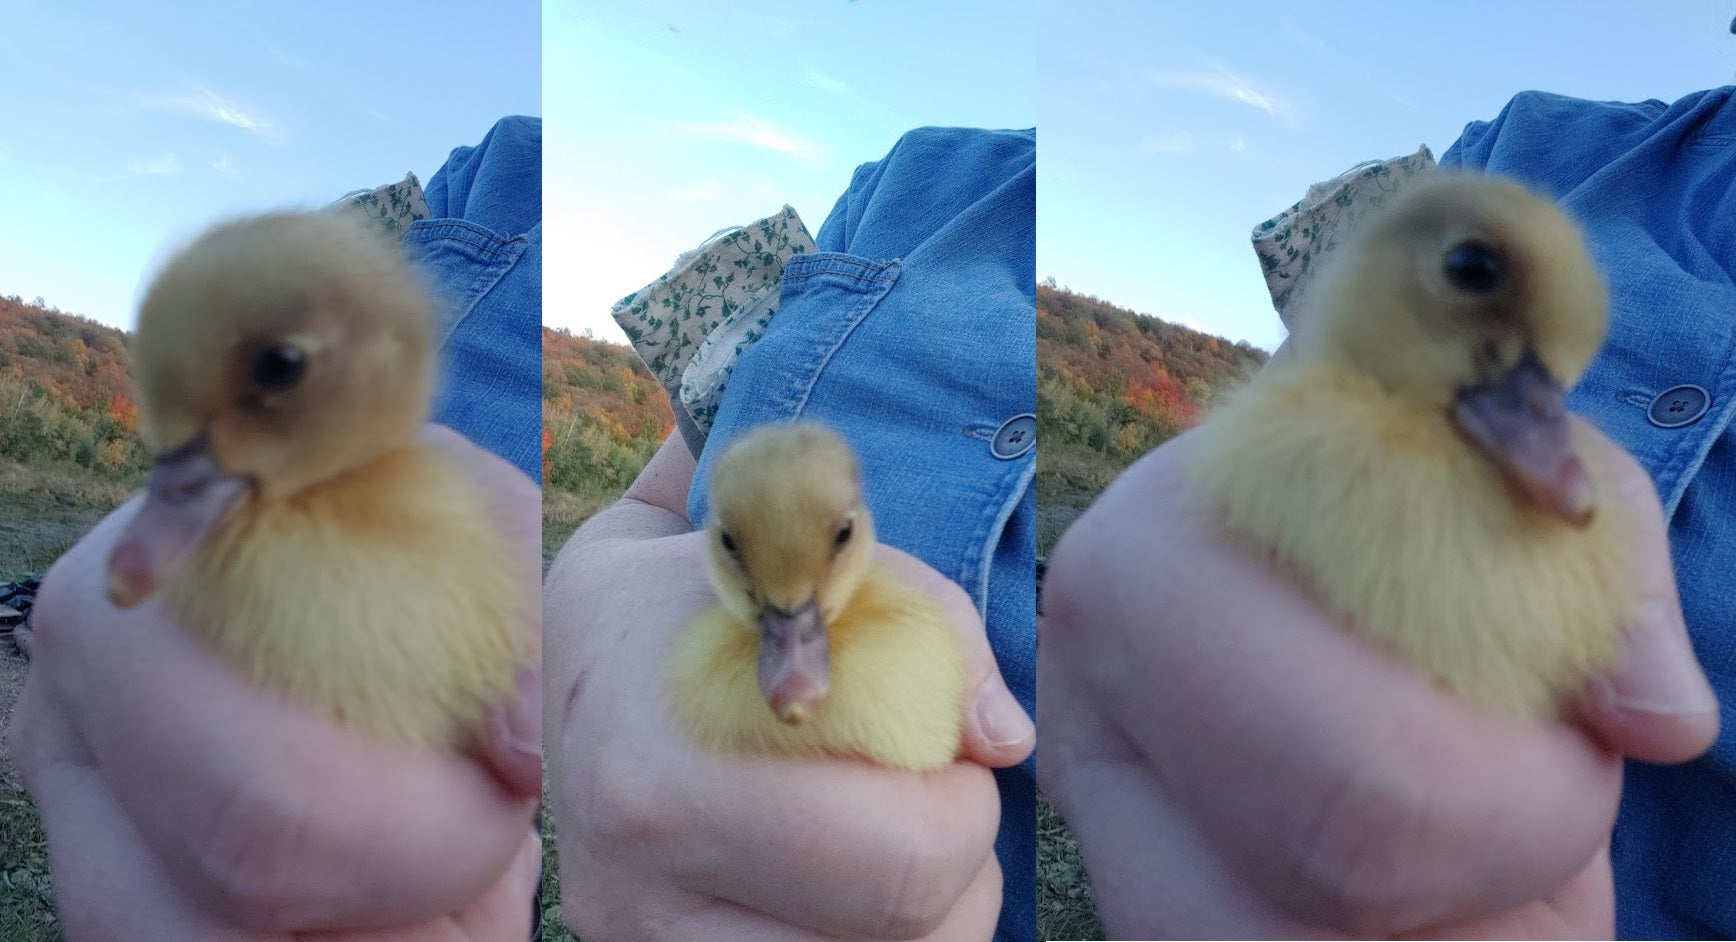 1-day Old Duckling